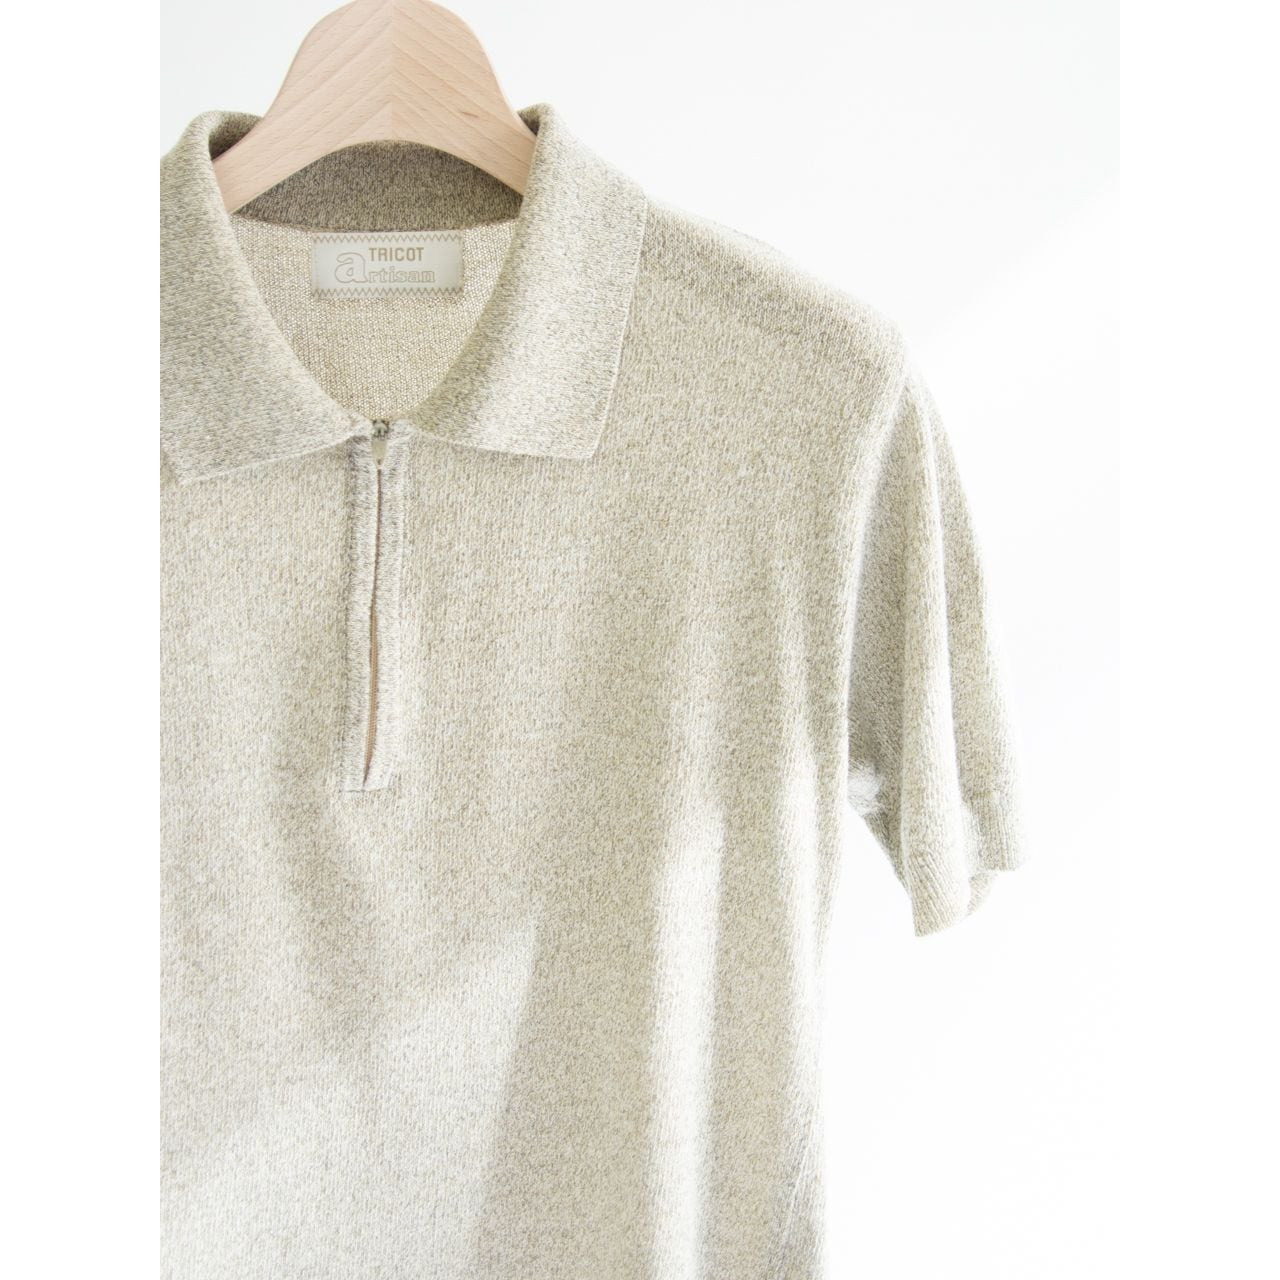 artisan TRICOT】Made in France Cotton-Nylon-Acrylic Knit Polo